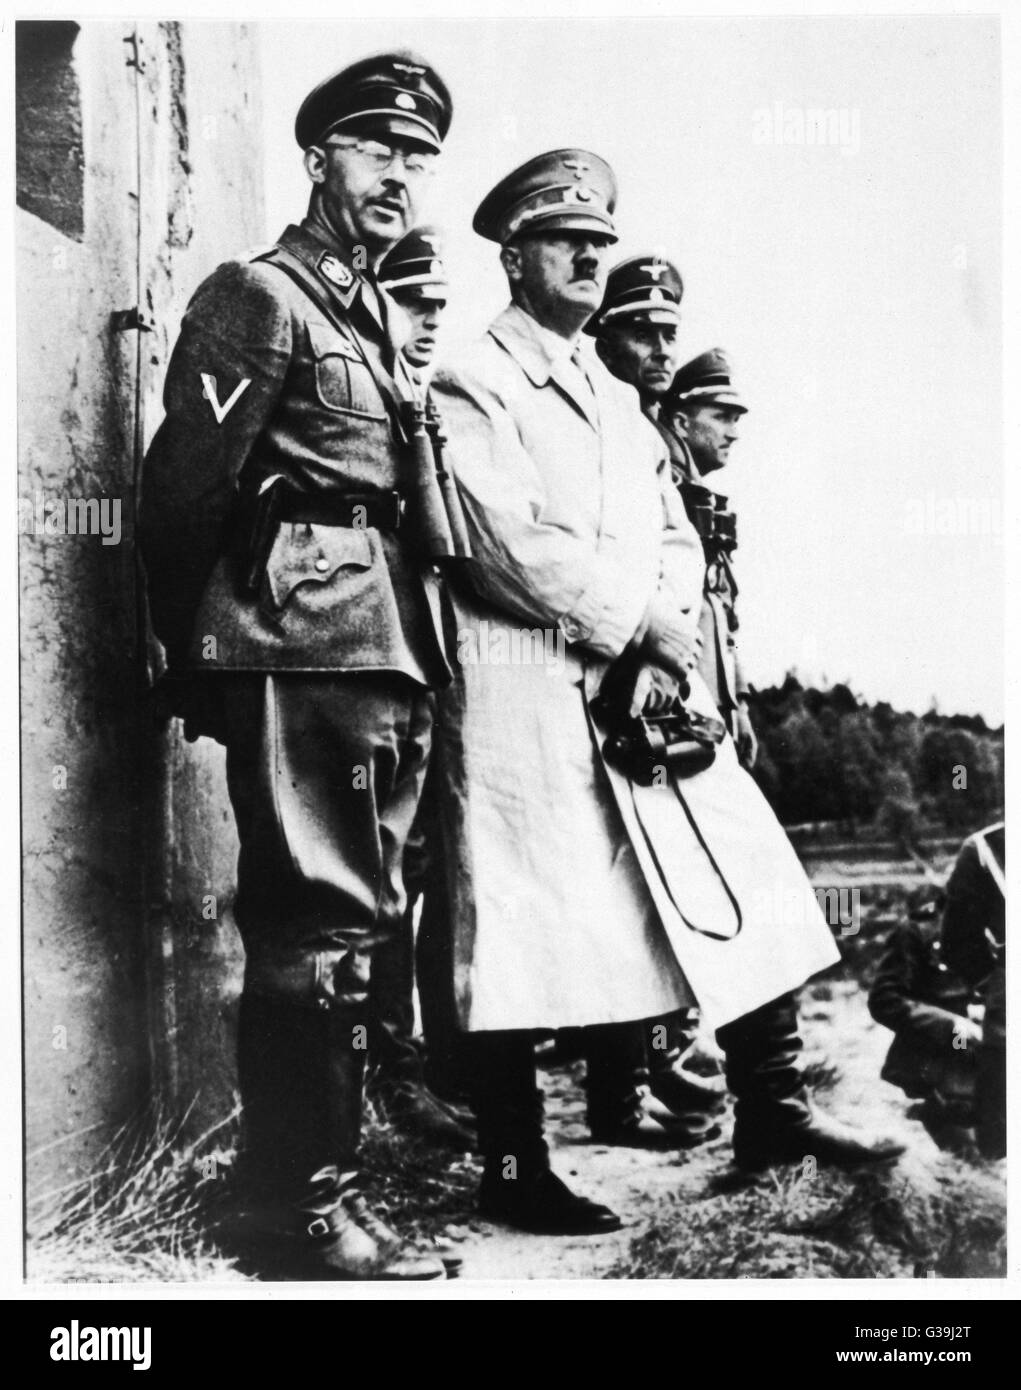 HEINRICH HIMMLER Himmler accompanying Hitler  during the early years of the  Third Reich       Date: 1900 - 1945 Stock Photo